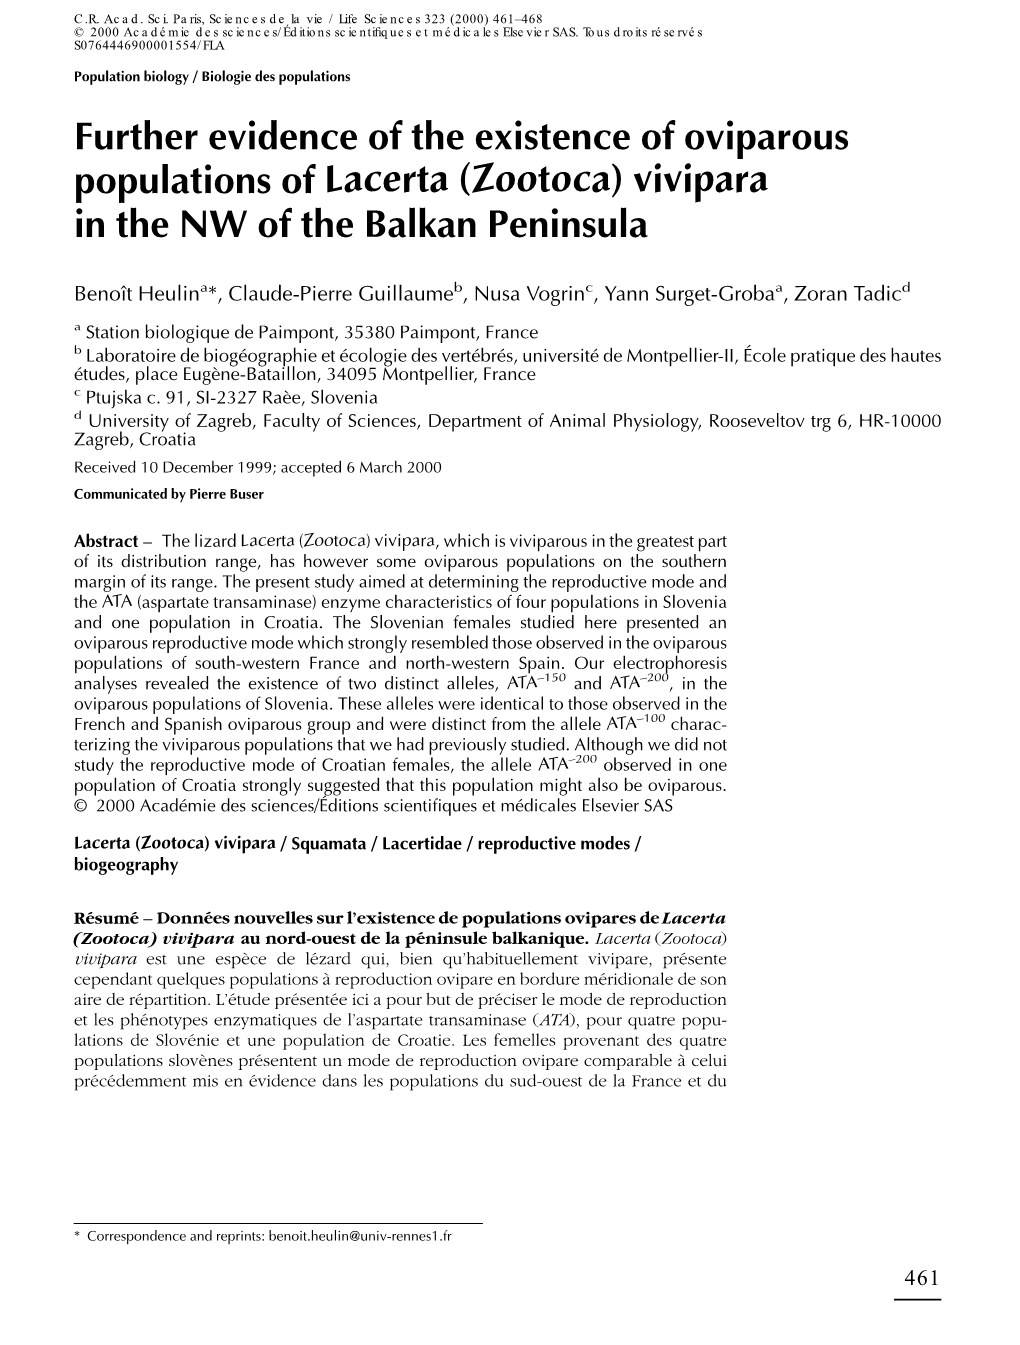 Further Evidence of the Existence of Oviparous Populations of Lacerta (Zootoca) Vivipara in the NW of the Balkan Peninsula